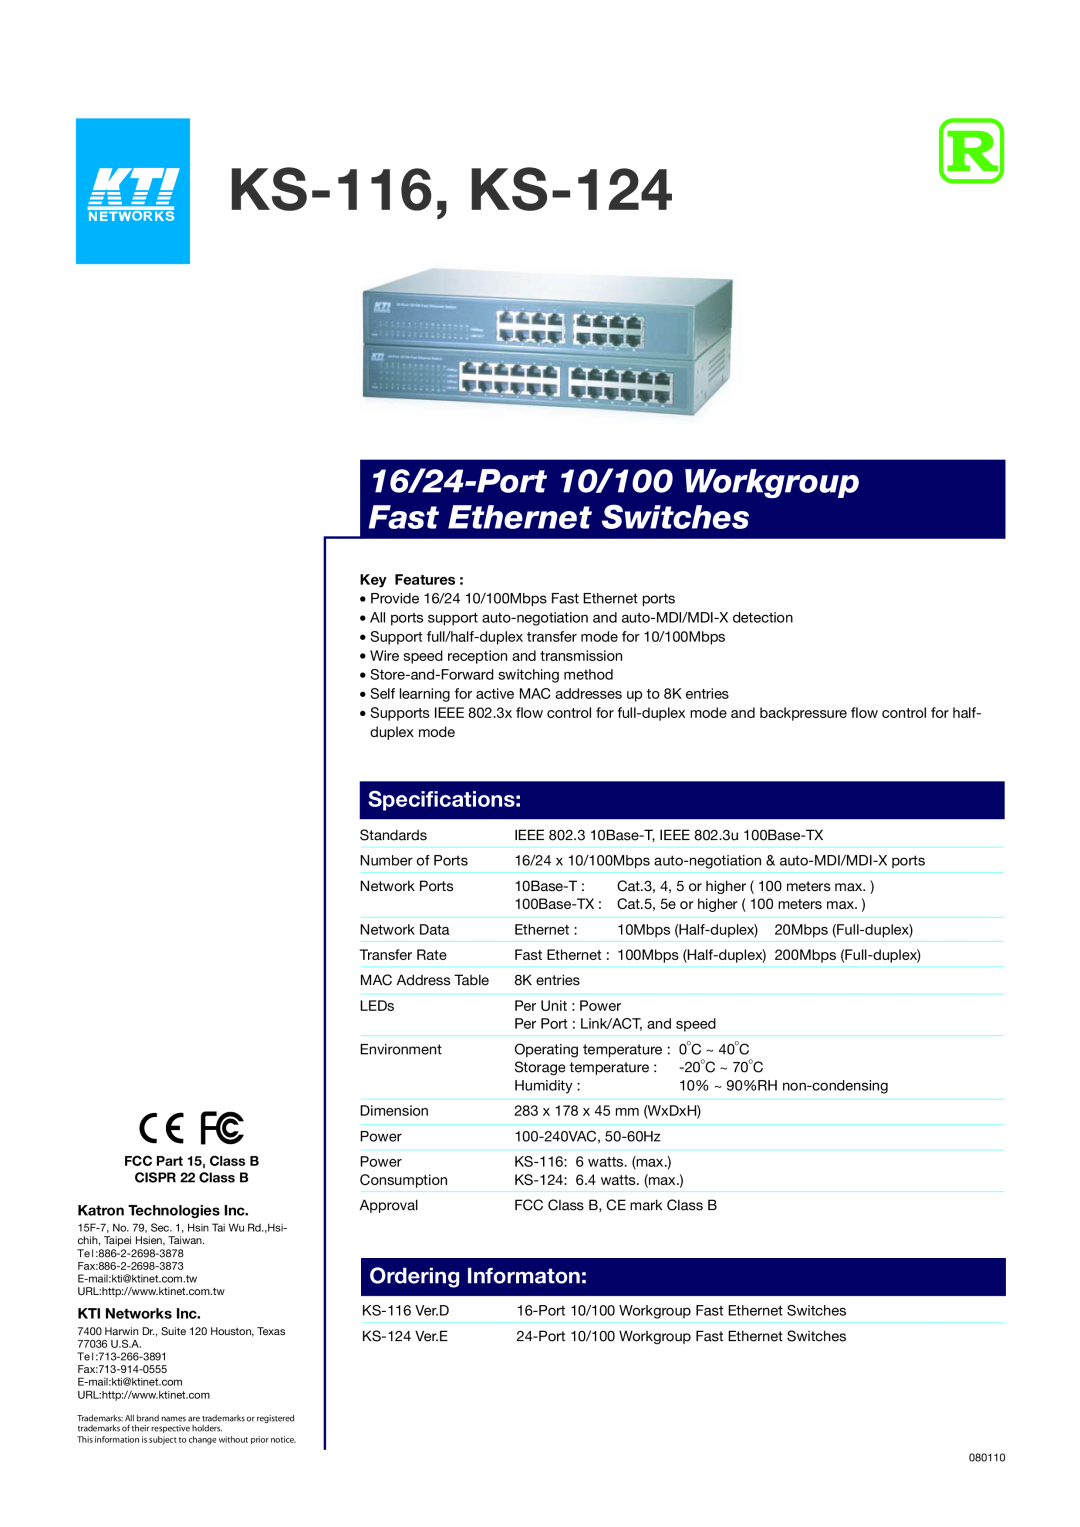 KTI Networks specifications KS-116, KS-124, 16/24-Port 10/100 Workgroup Fast Ethernet Switches, Specifications 